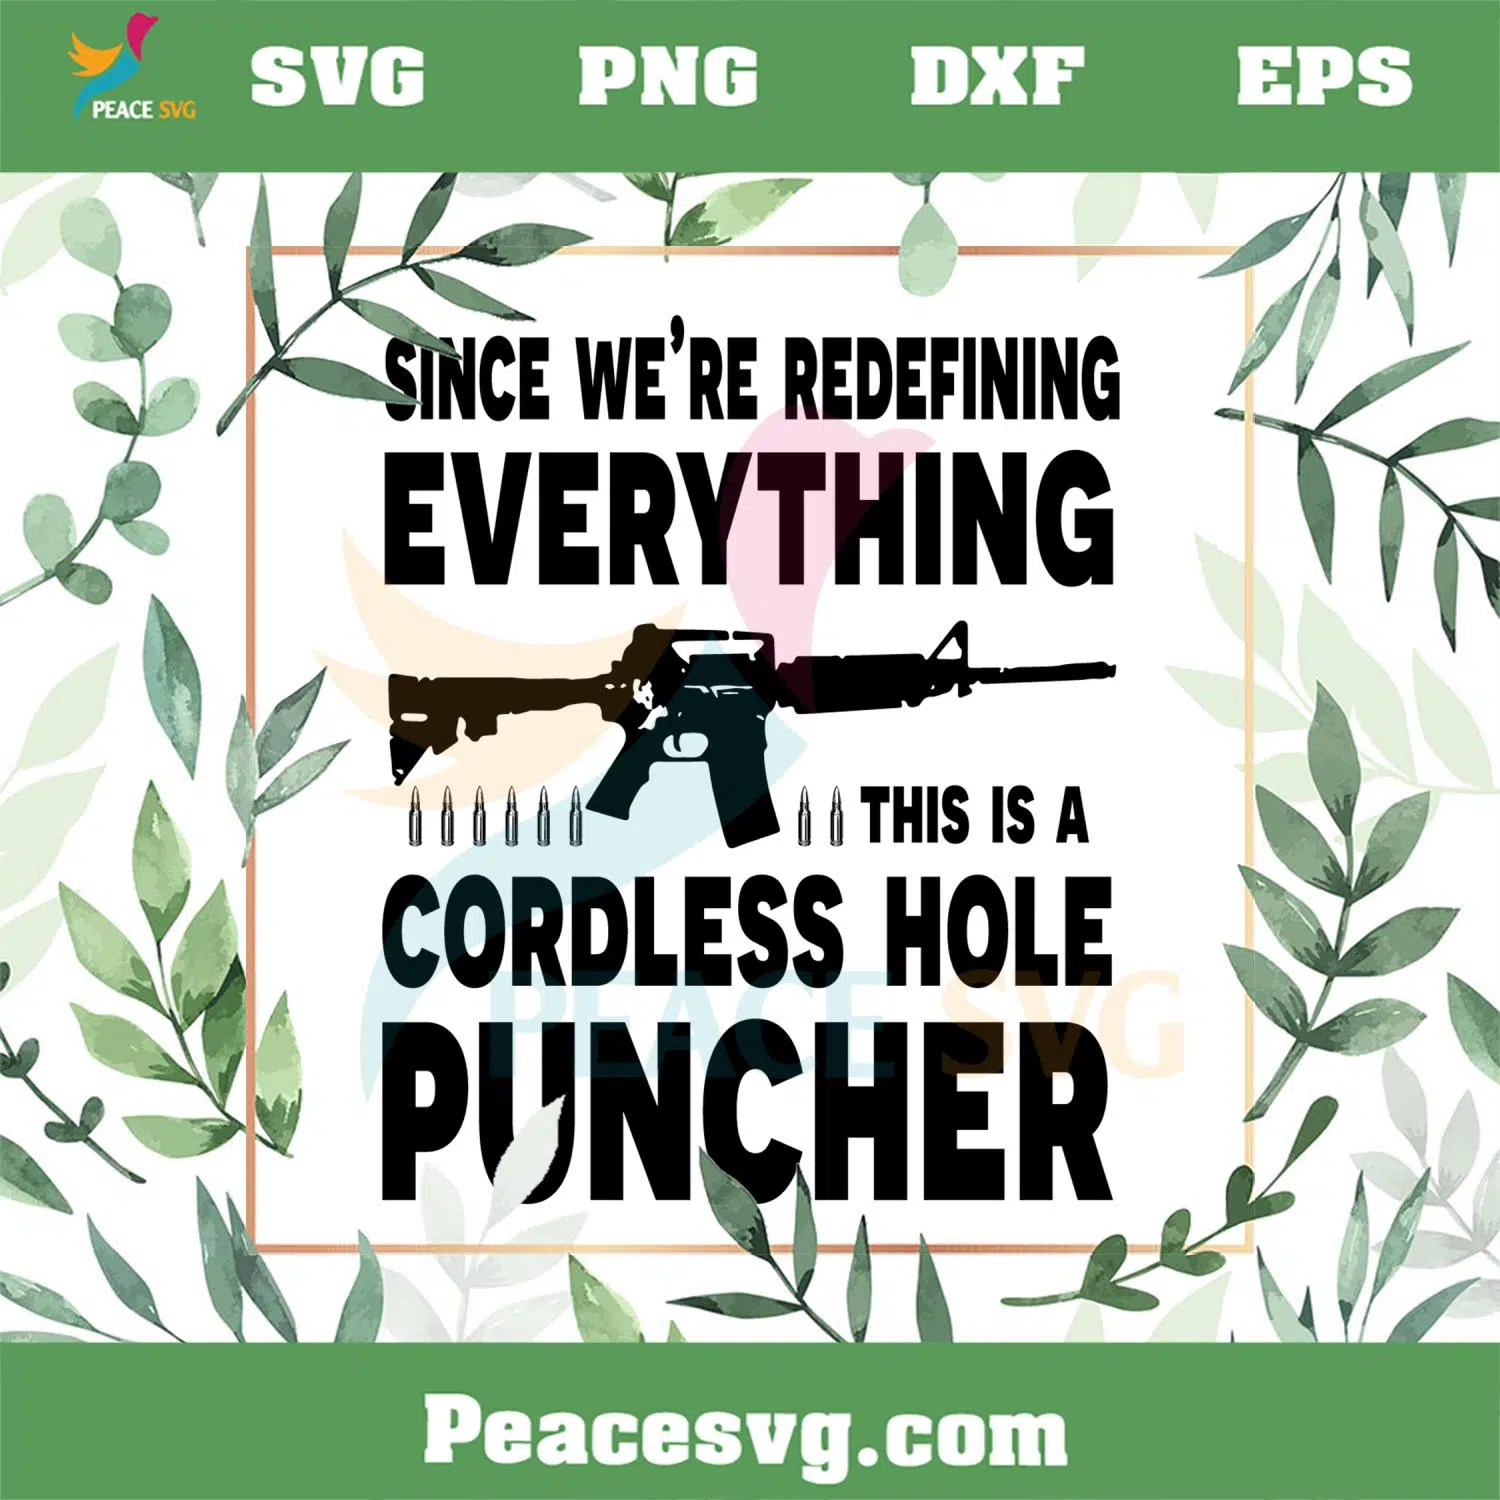 Since We Are Redefining Everything Cordless Hole Puncher USA Patriotic SVG Cutting Files